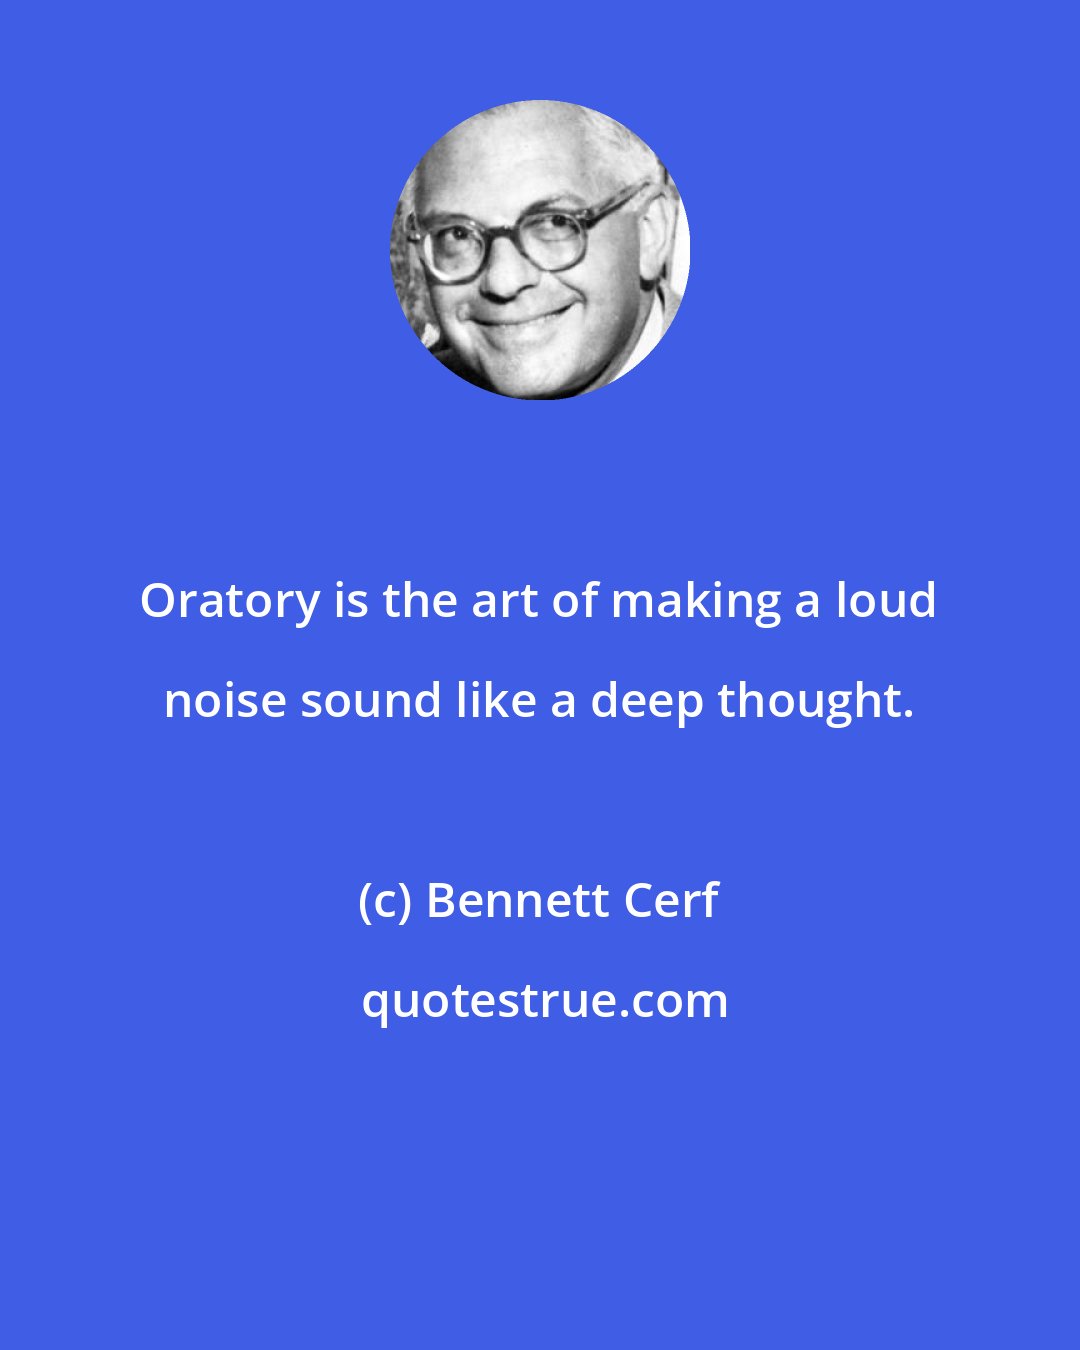 Bennett Cerf: Oratory is the art of making a loud noise sound like a deep thought.